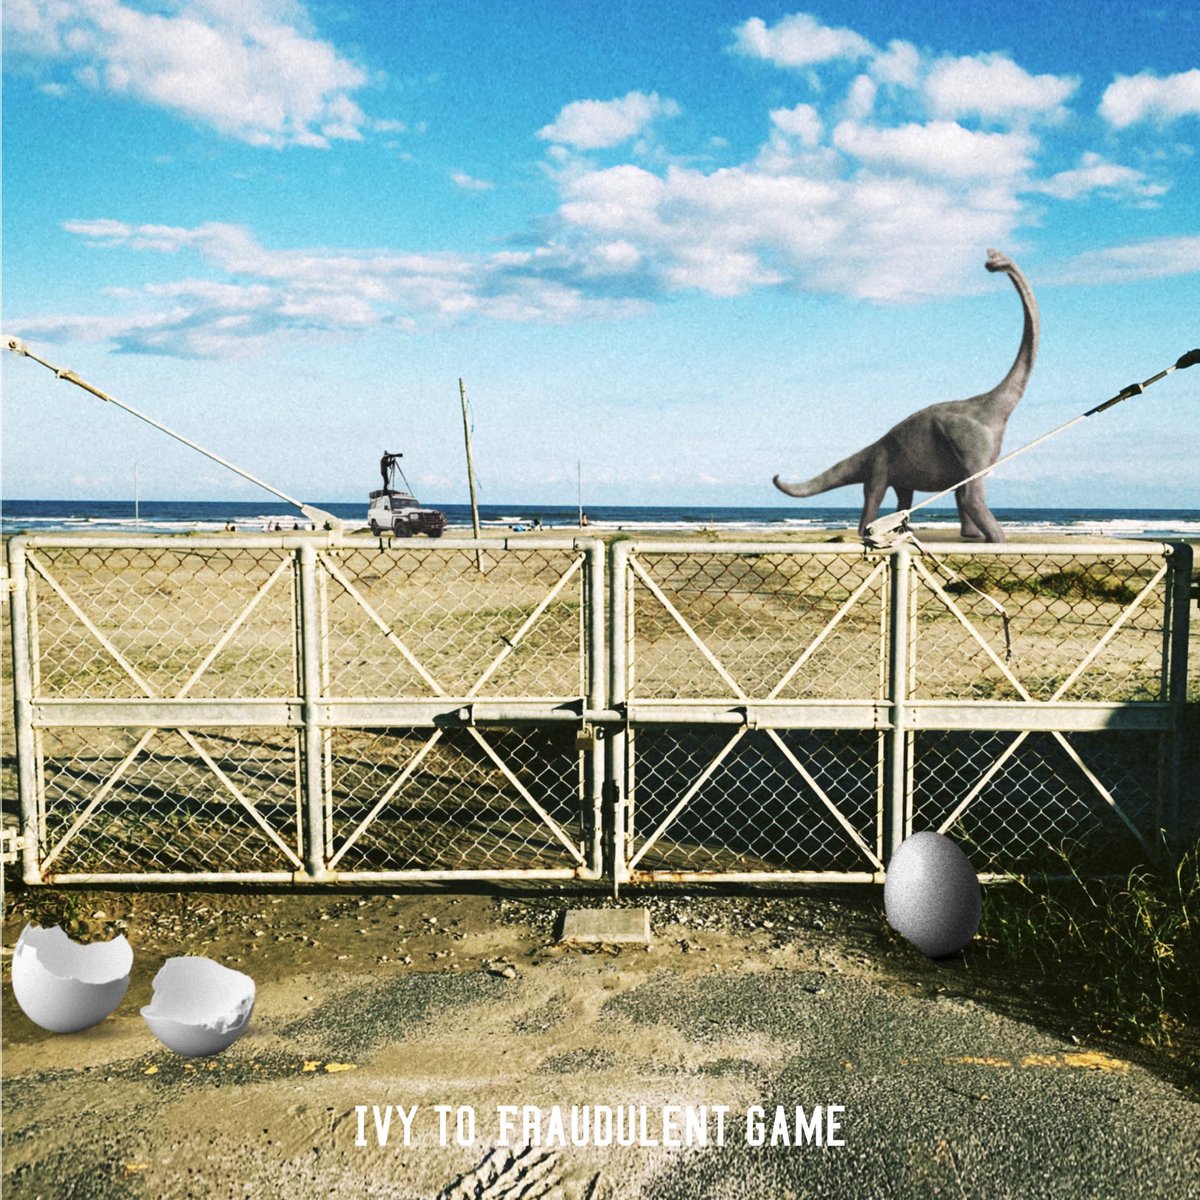 『Ivy to Fraudulent Game - Heart room』収録の『Singin' in the NOW』ジャケット